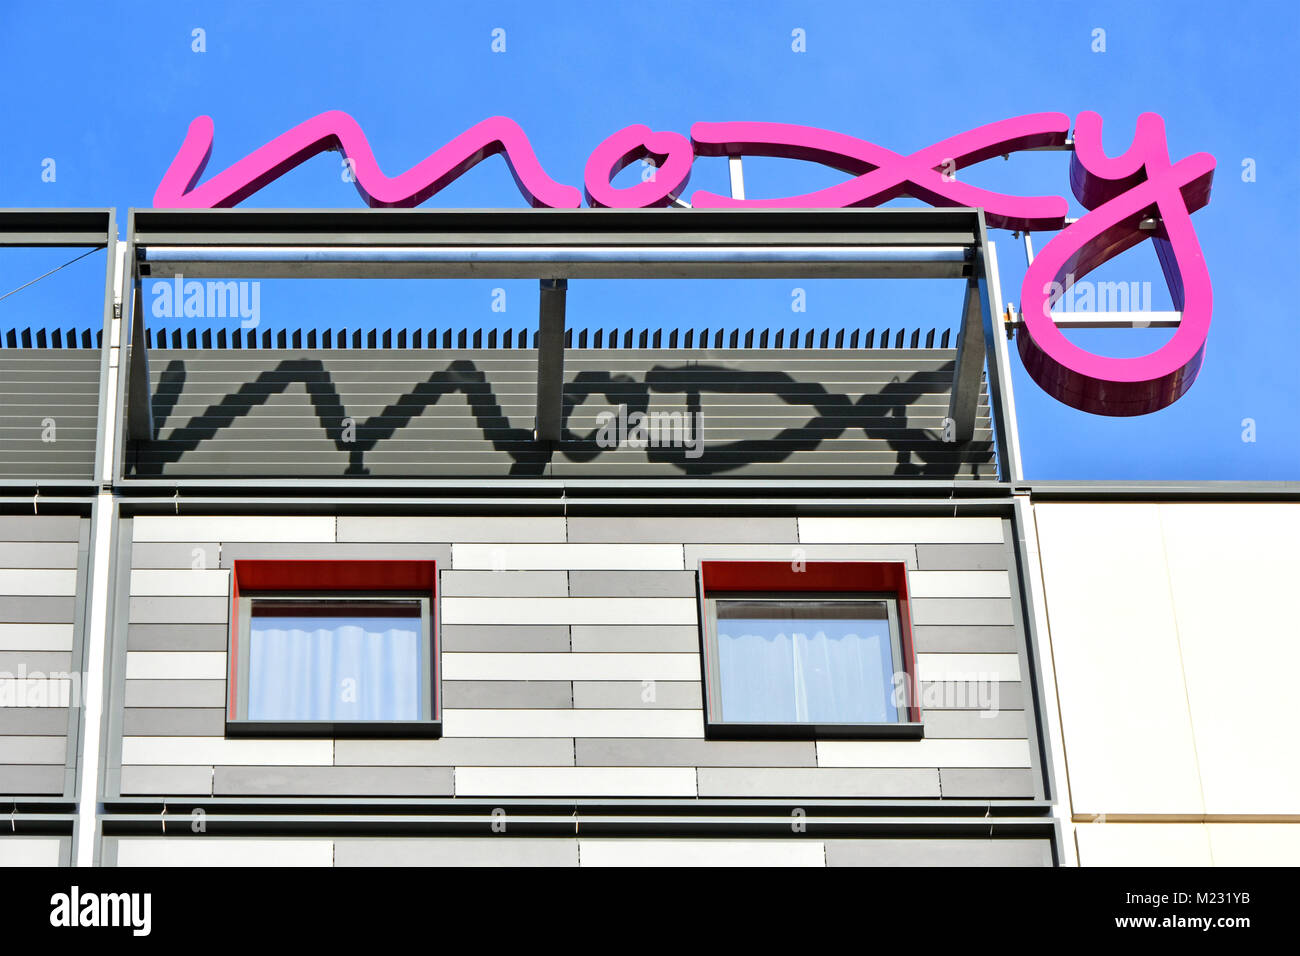 Moxy Hotel a brand of Marriot International sign above new build hotel in Stratford London close to the station & Queen Elizabeth Olympic Park England Stock Photo